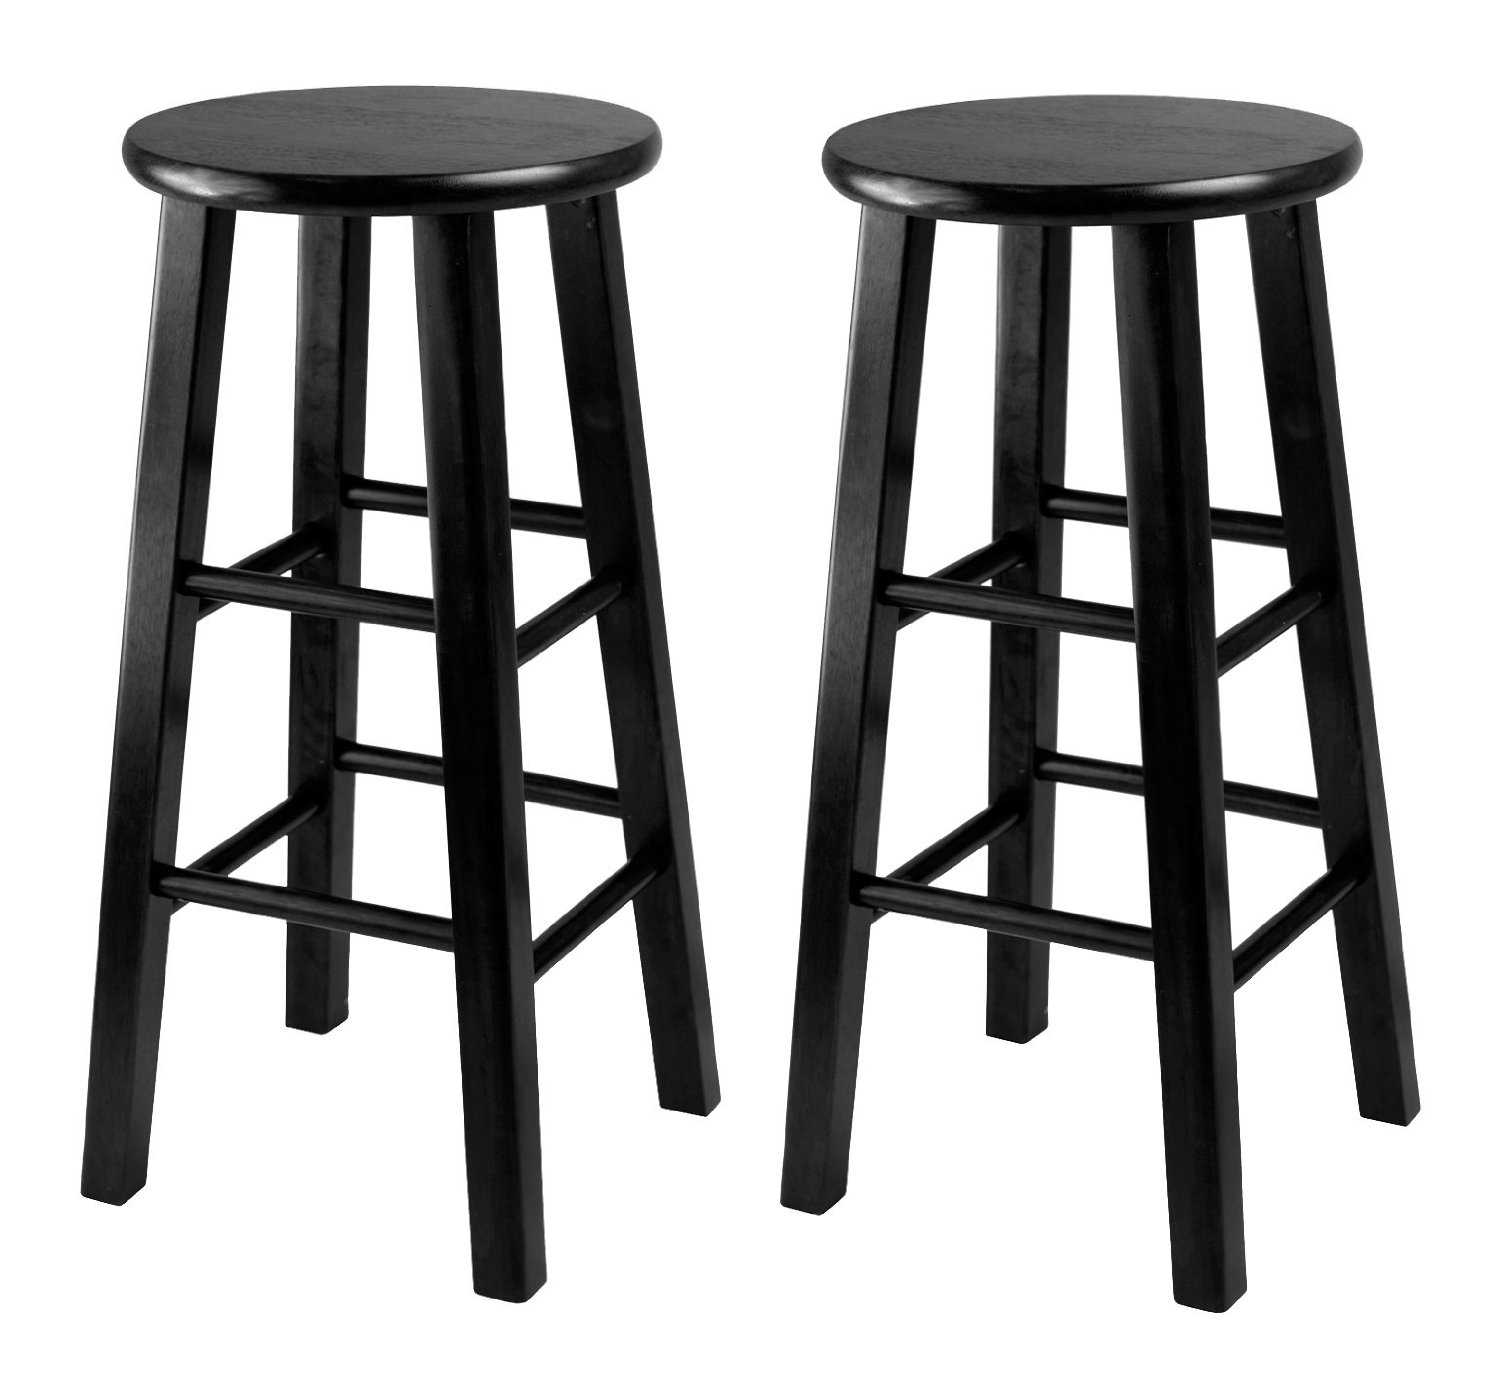 Two 24″ stools for $29